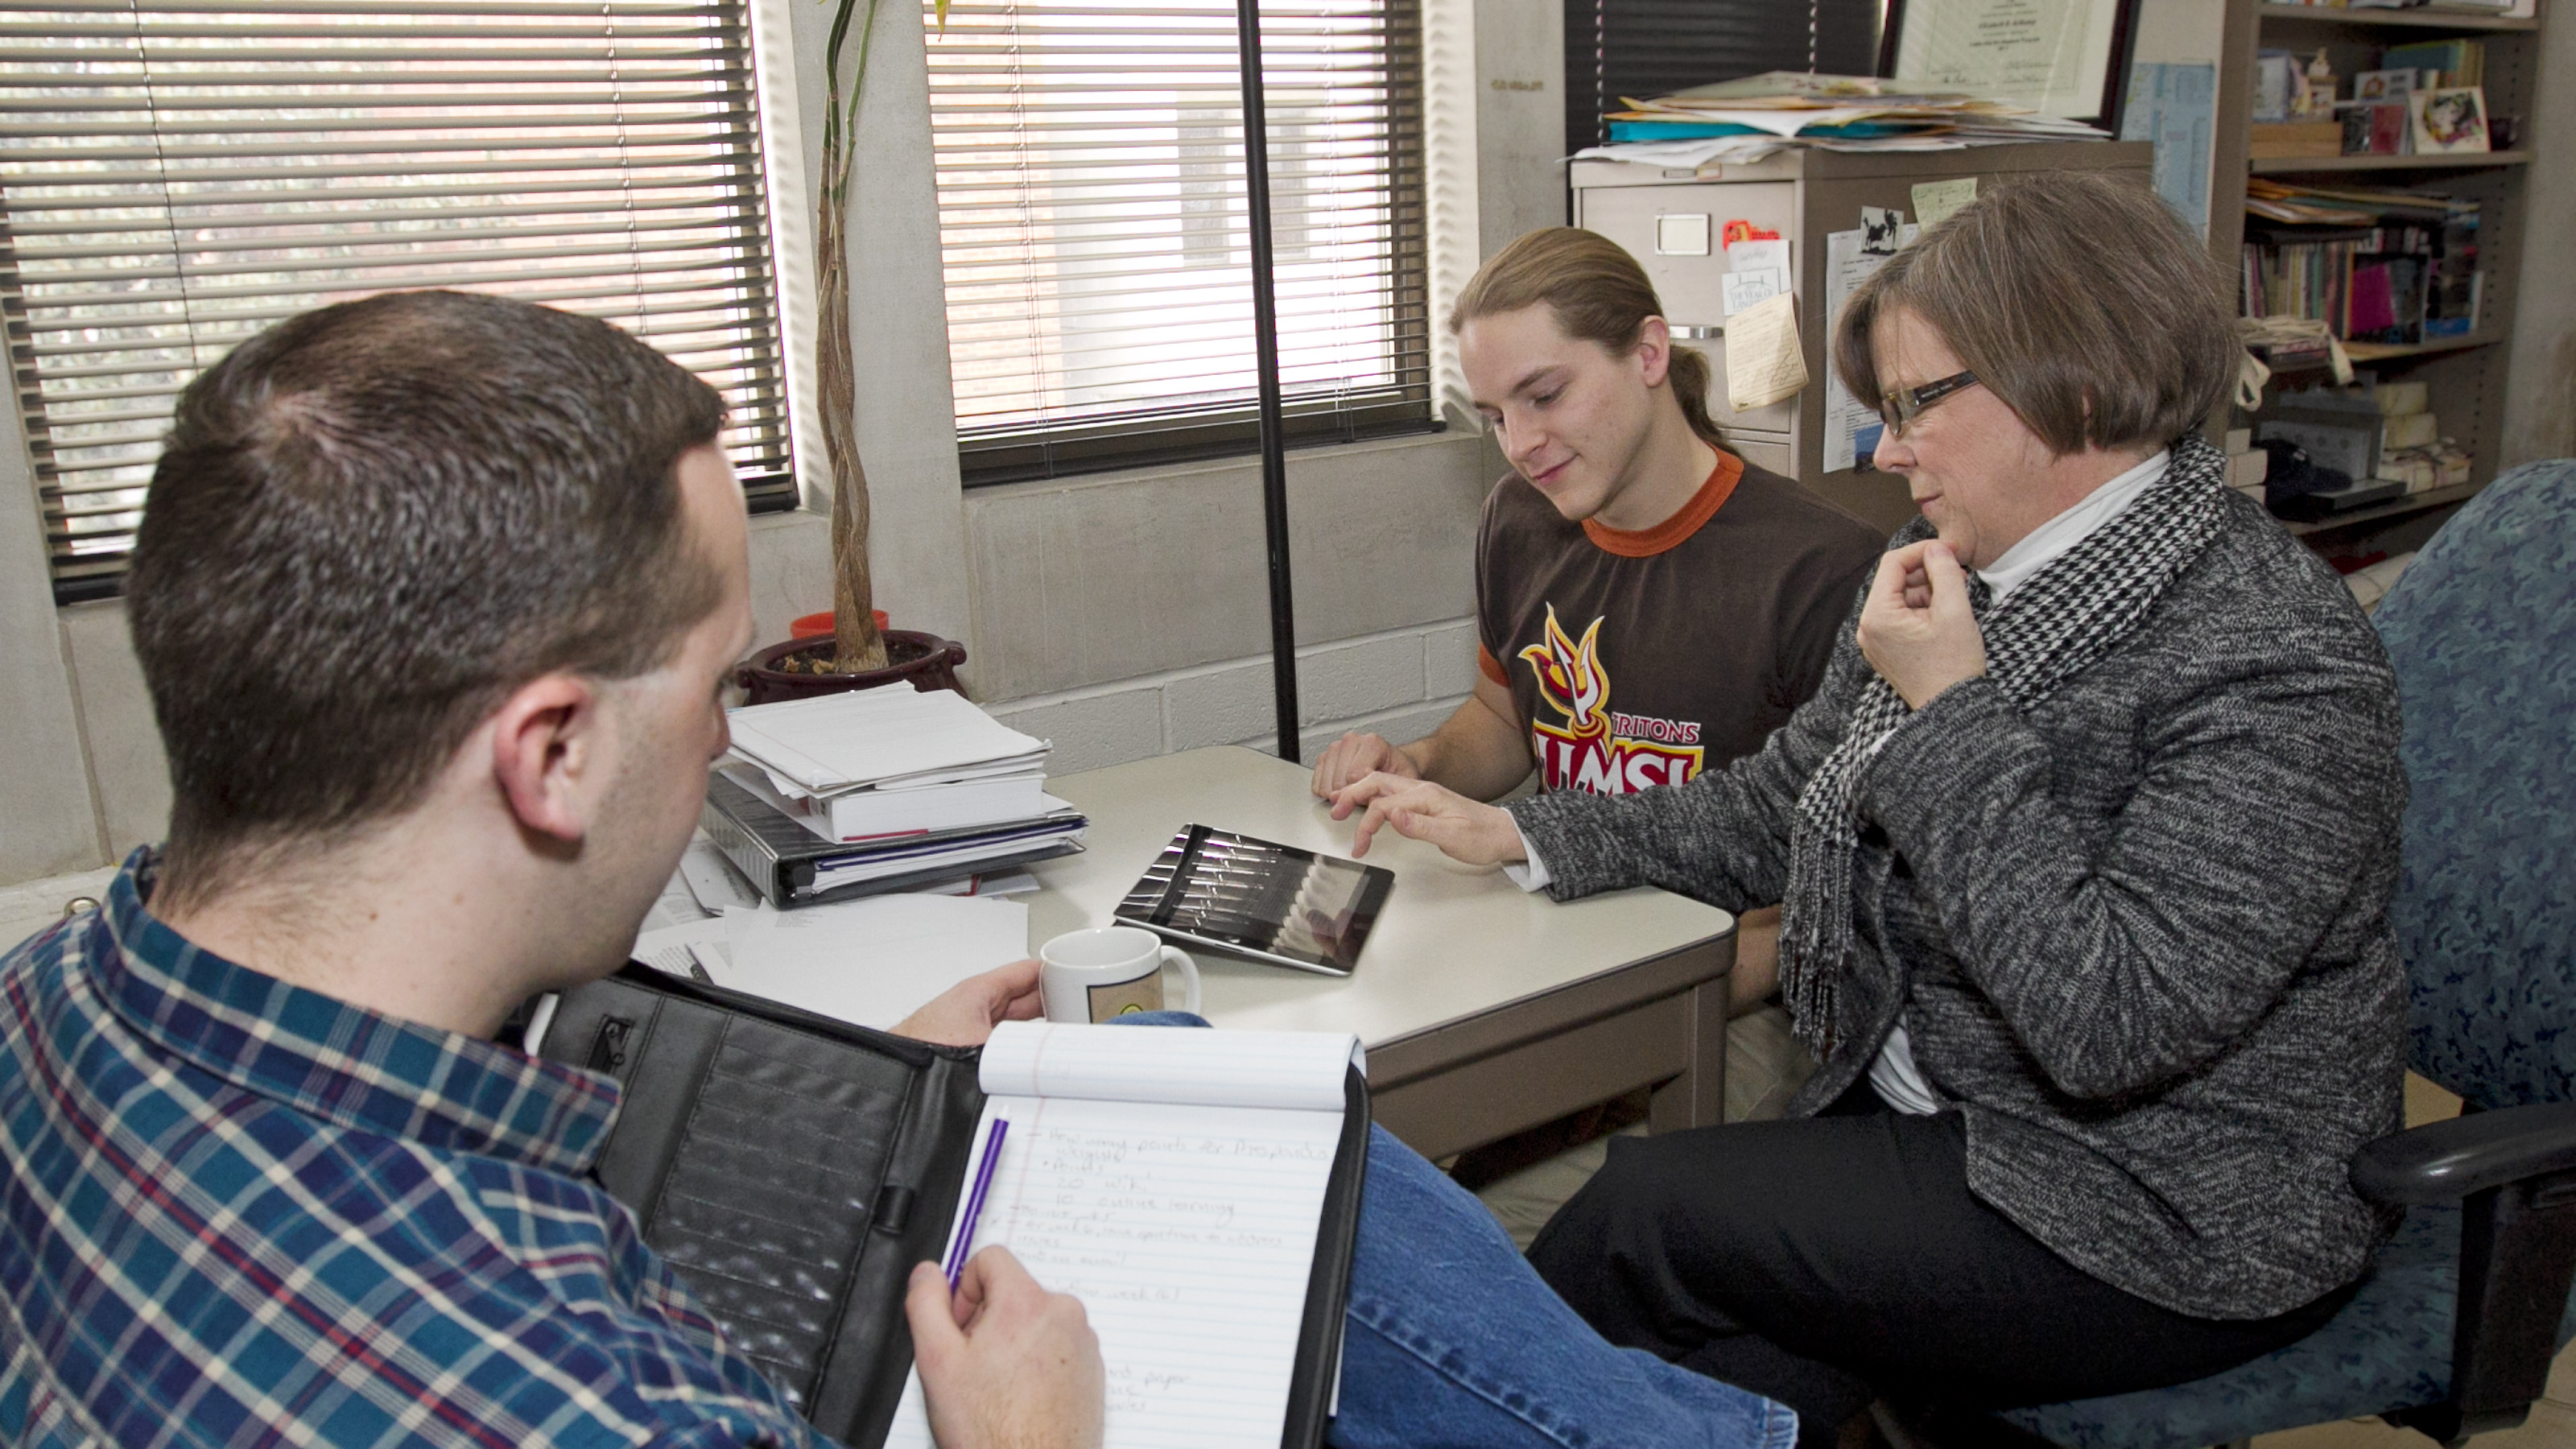 45 faculty start testing iPads, apps for classrooms